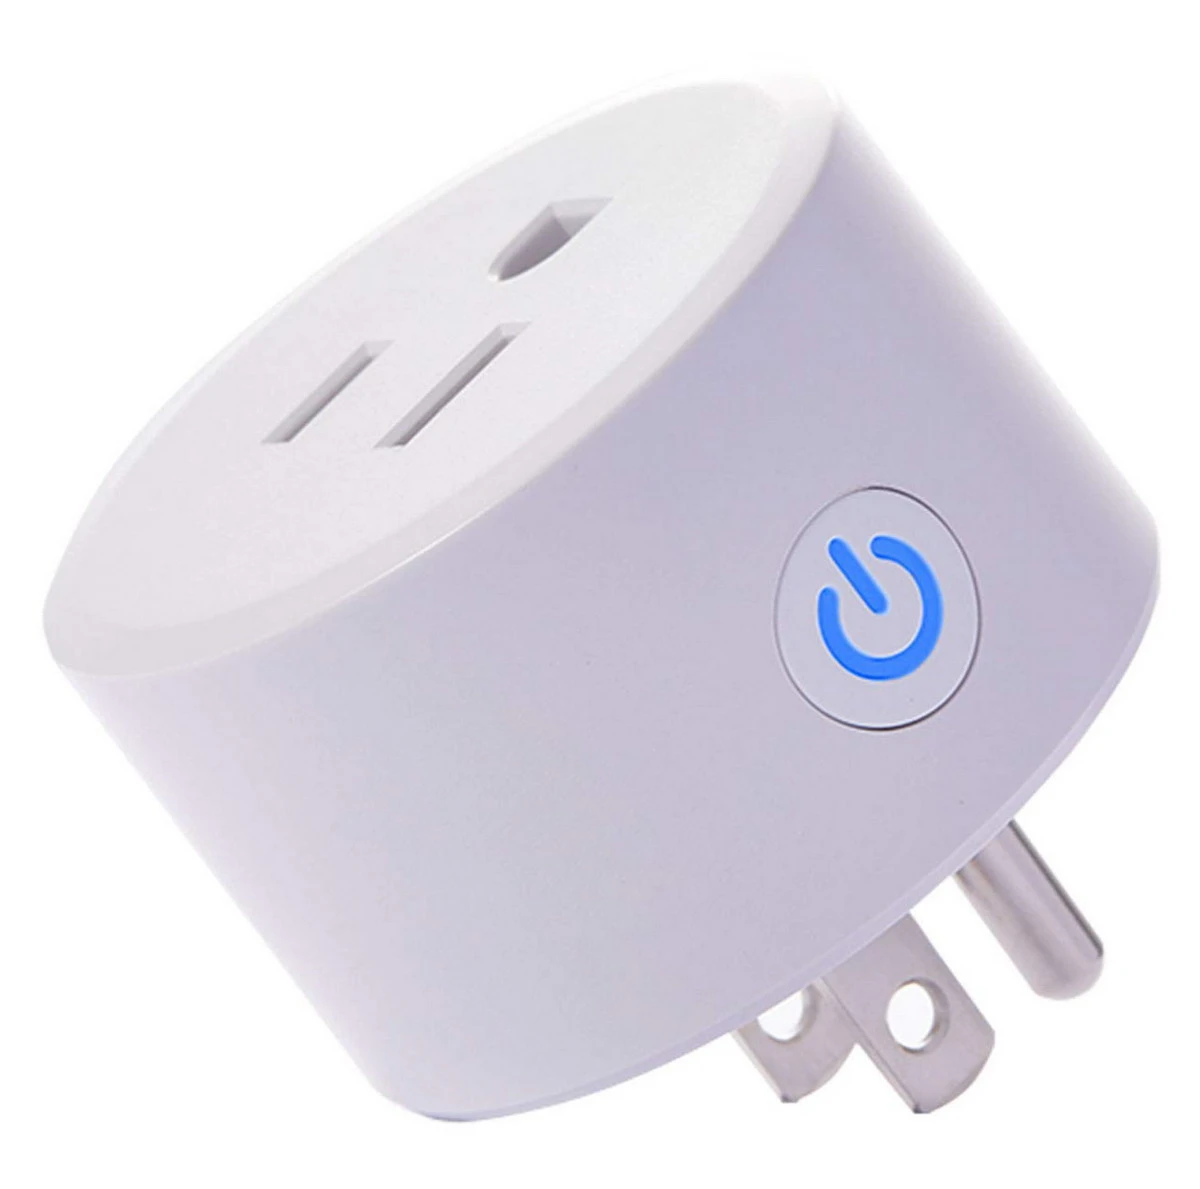 Smart plug features and functions